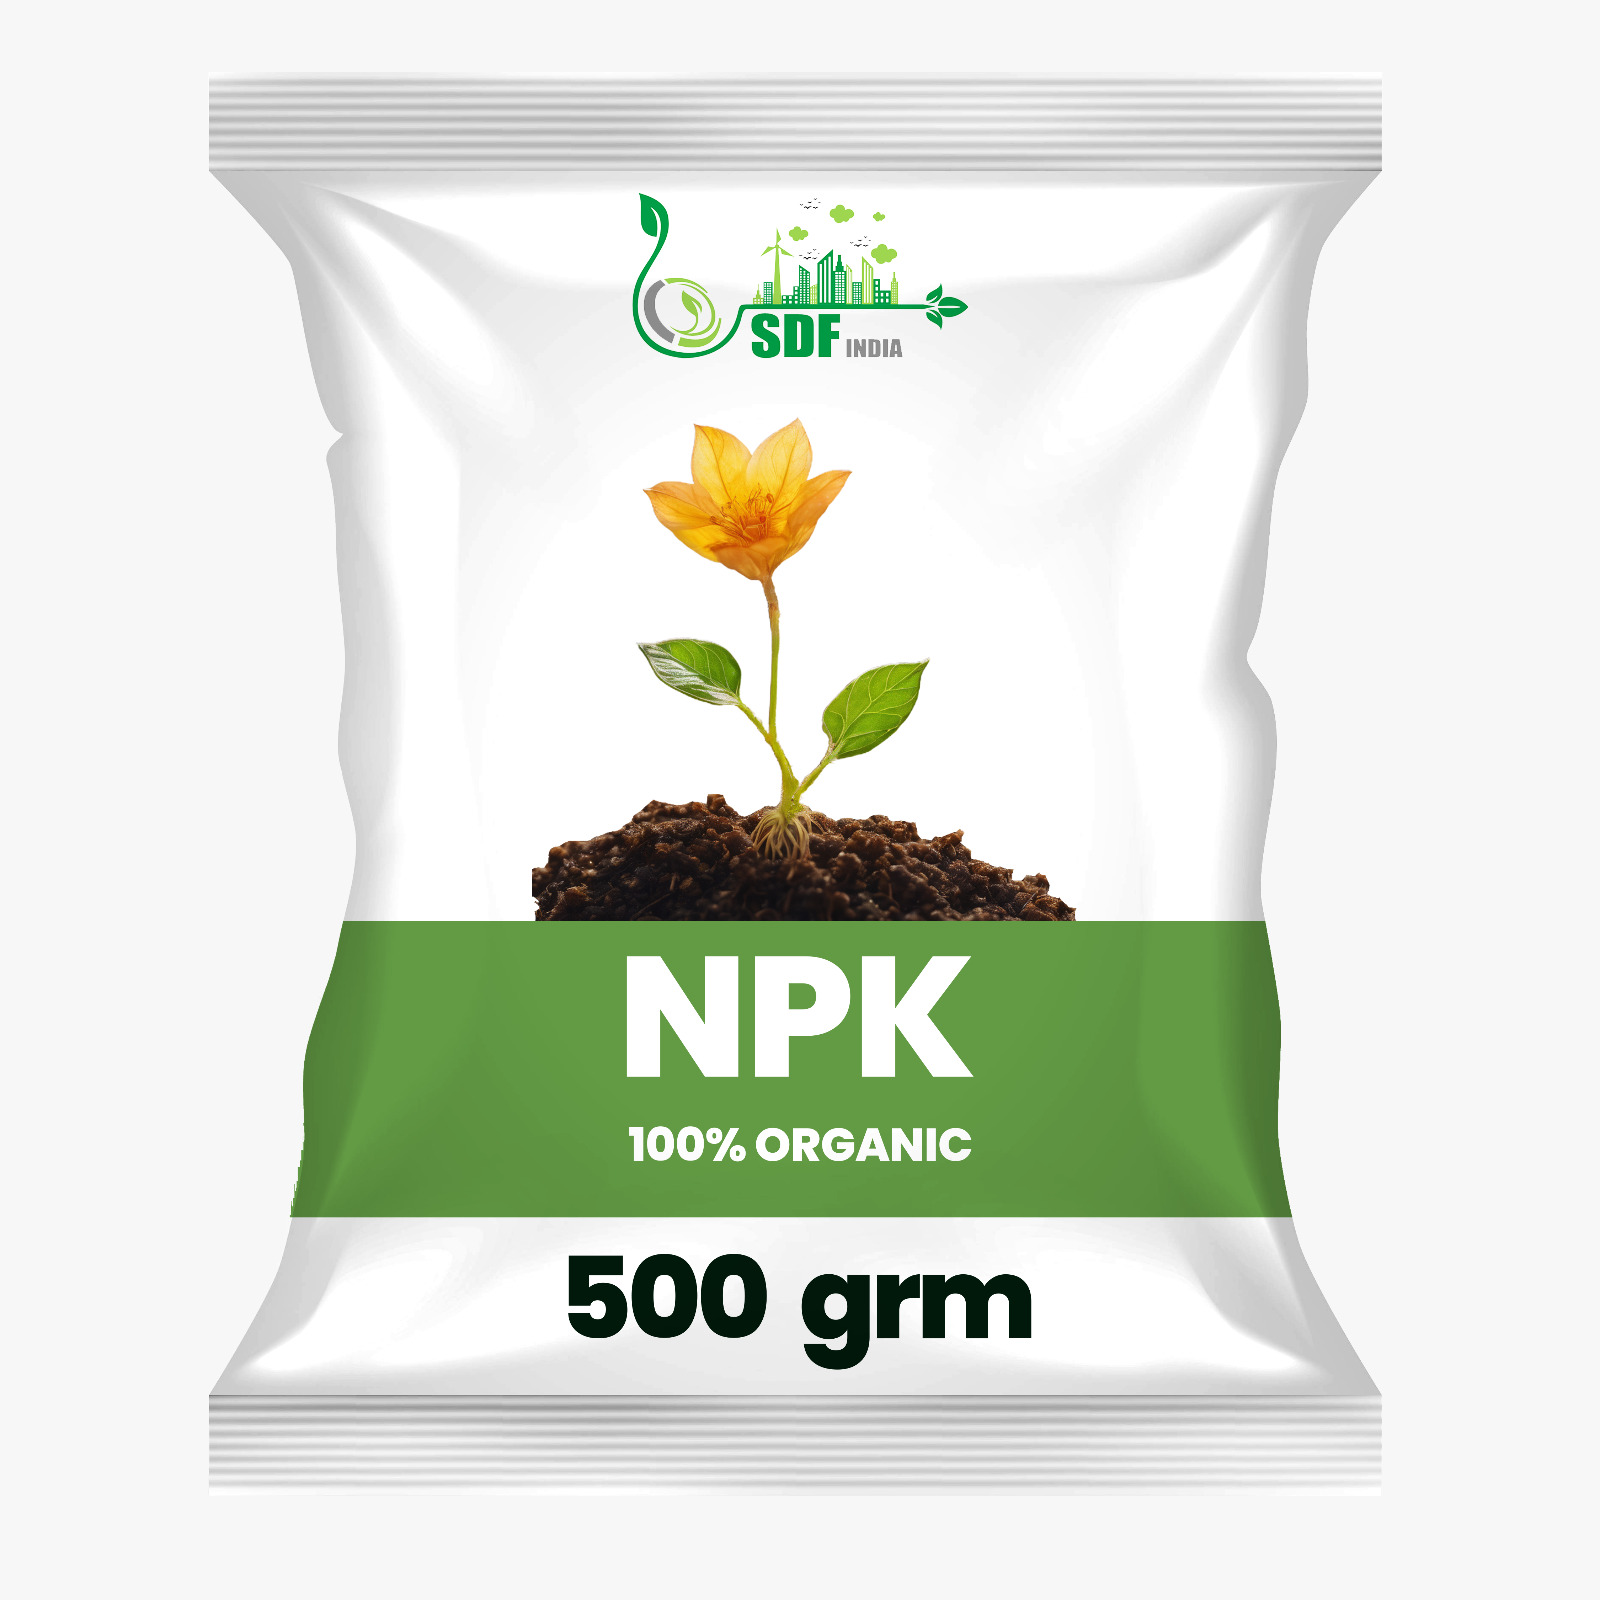  NPK Fertilizer for Plants 500gm I Complete Plant Food for Gardening, Growth Boost and Flowering